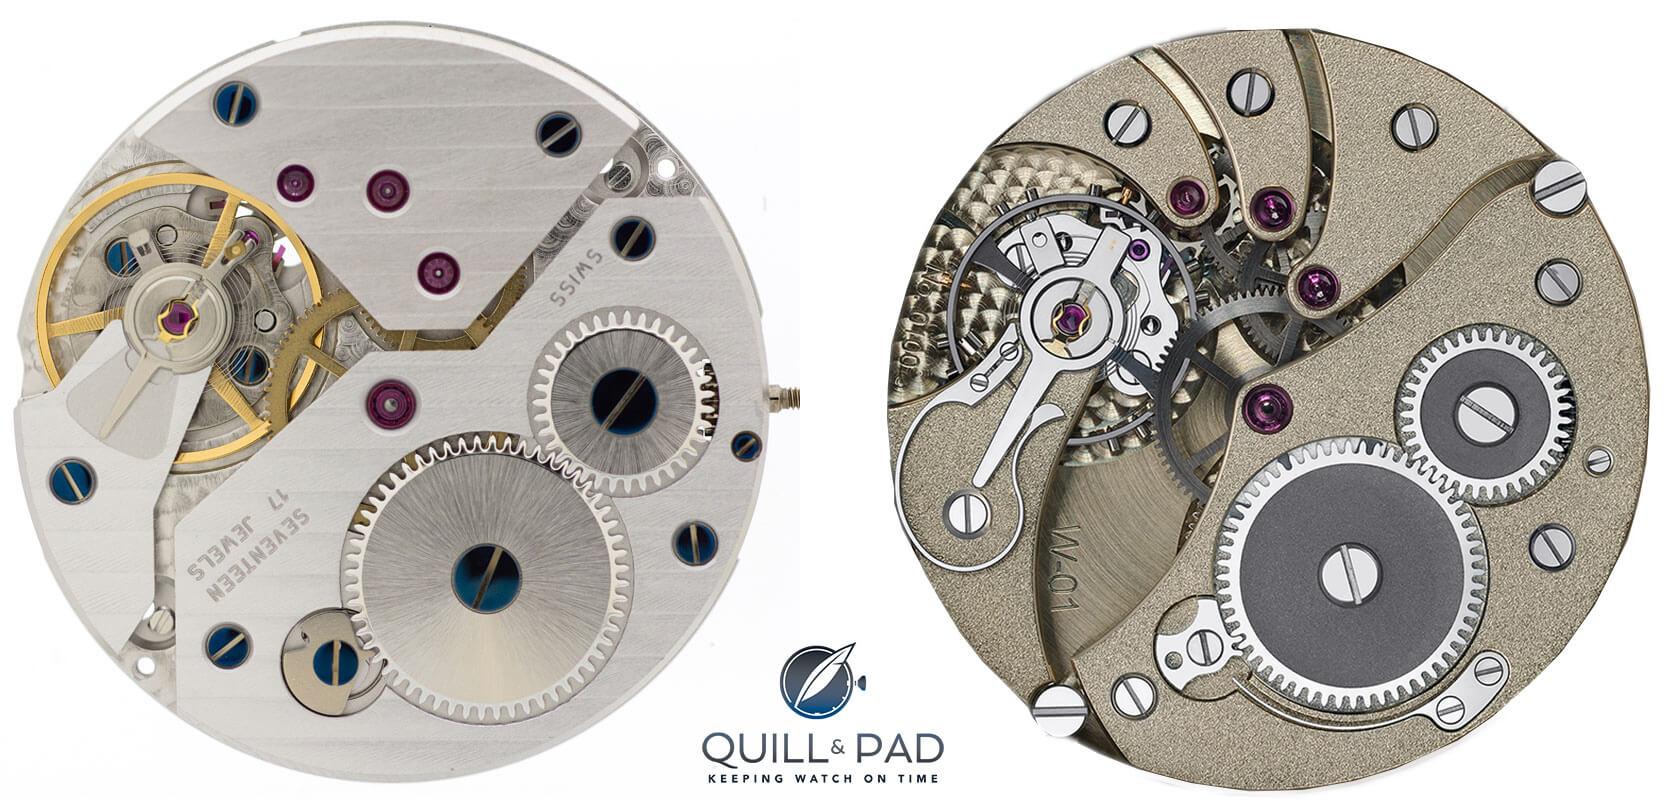 Standard Unitas 6498 movement left compared with the modified and hand finished WOSTEP Only Watch movement